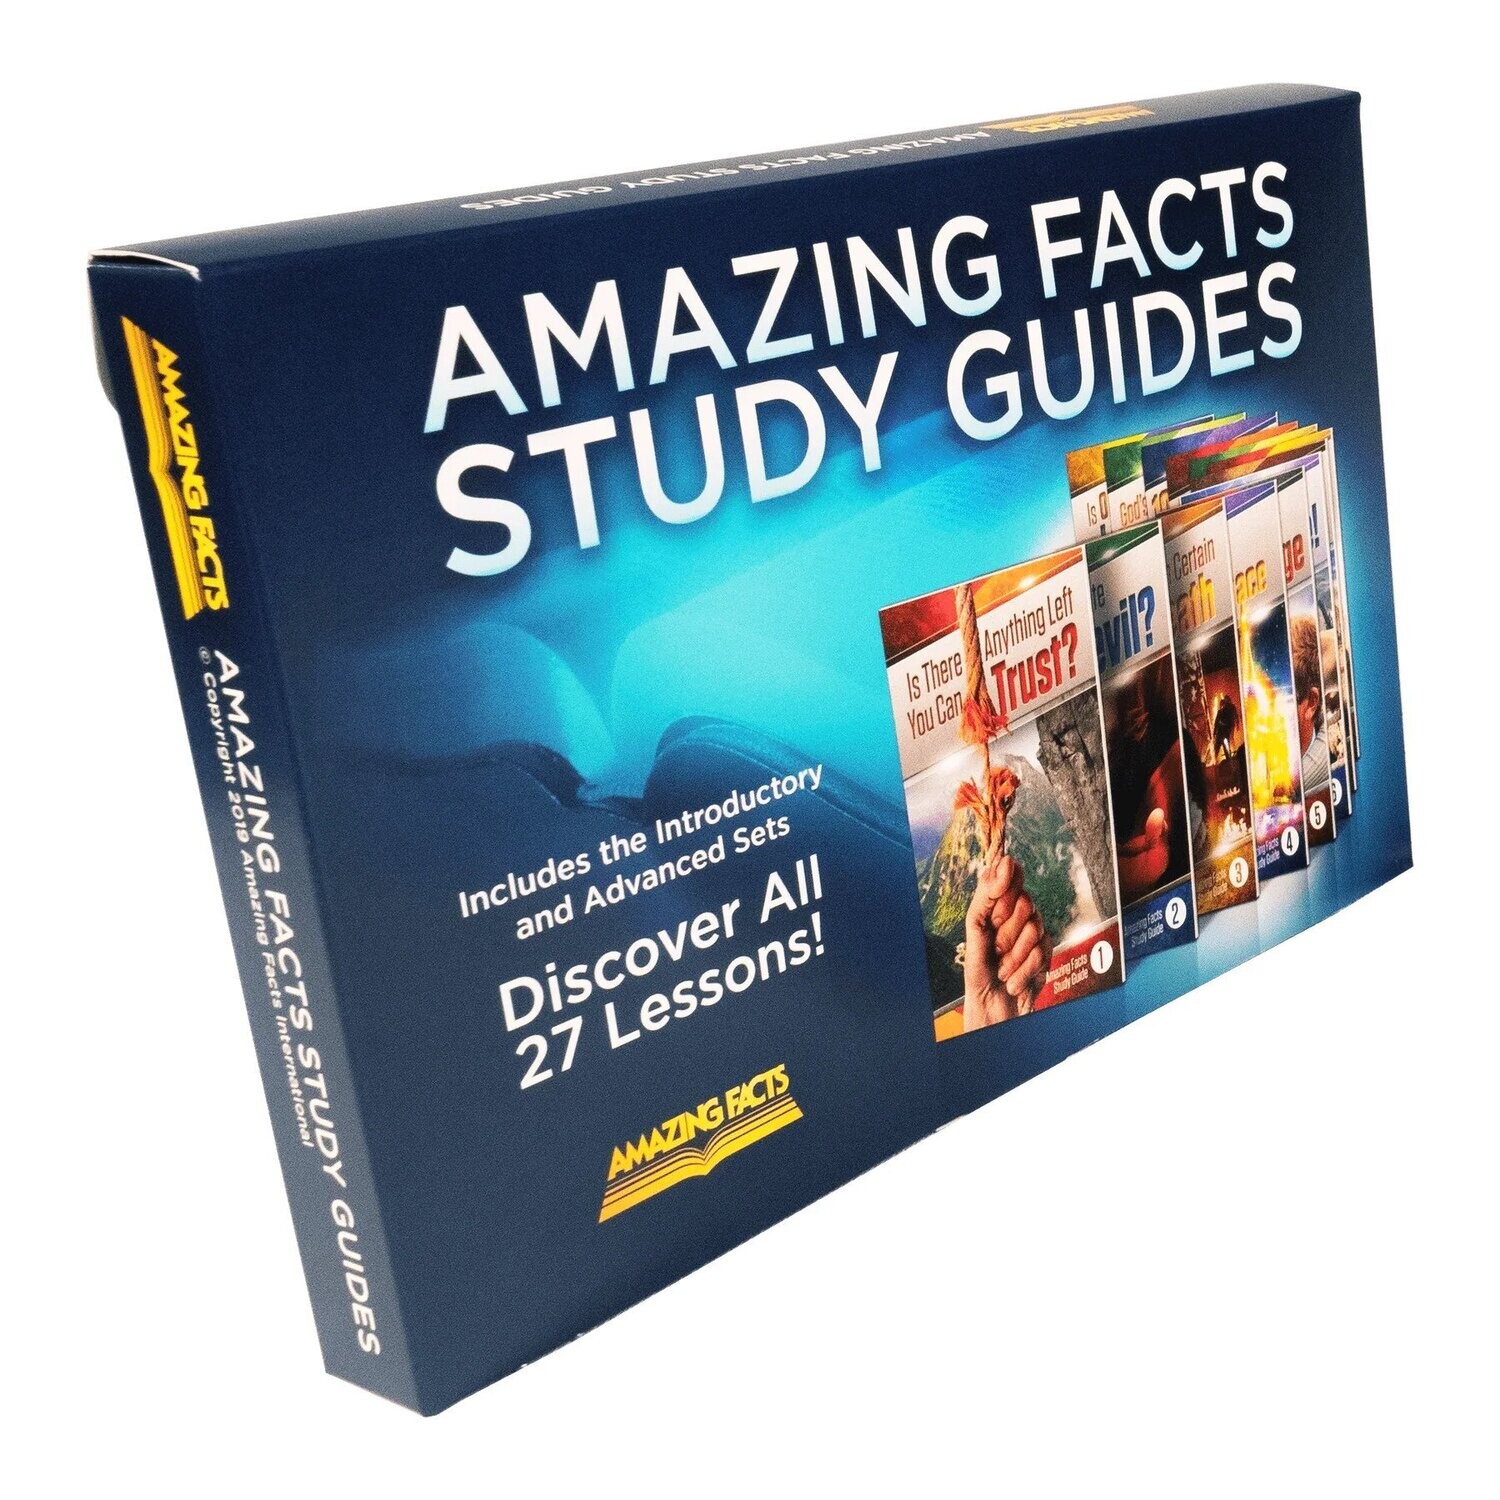 Amazing Facts Bible Study Guides Complete Set - 27 Lessons (B3/I8)